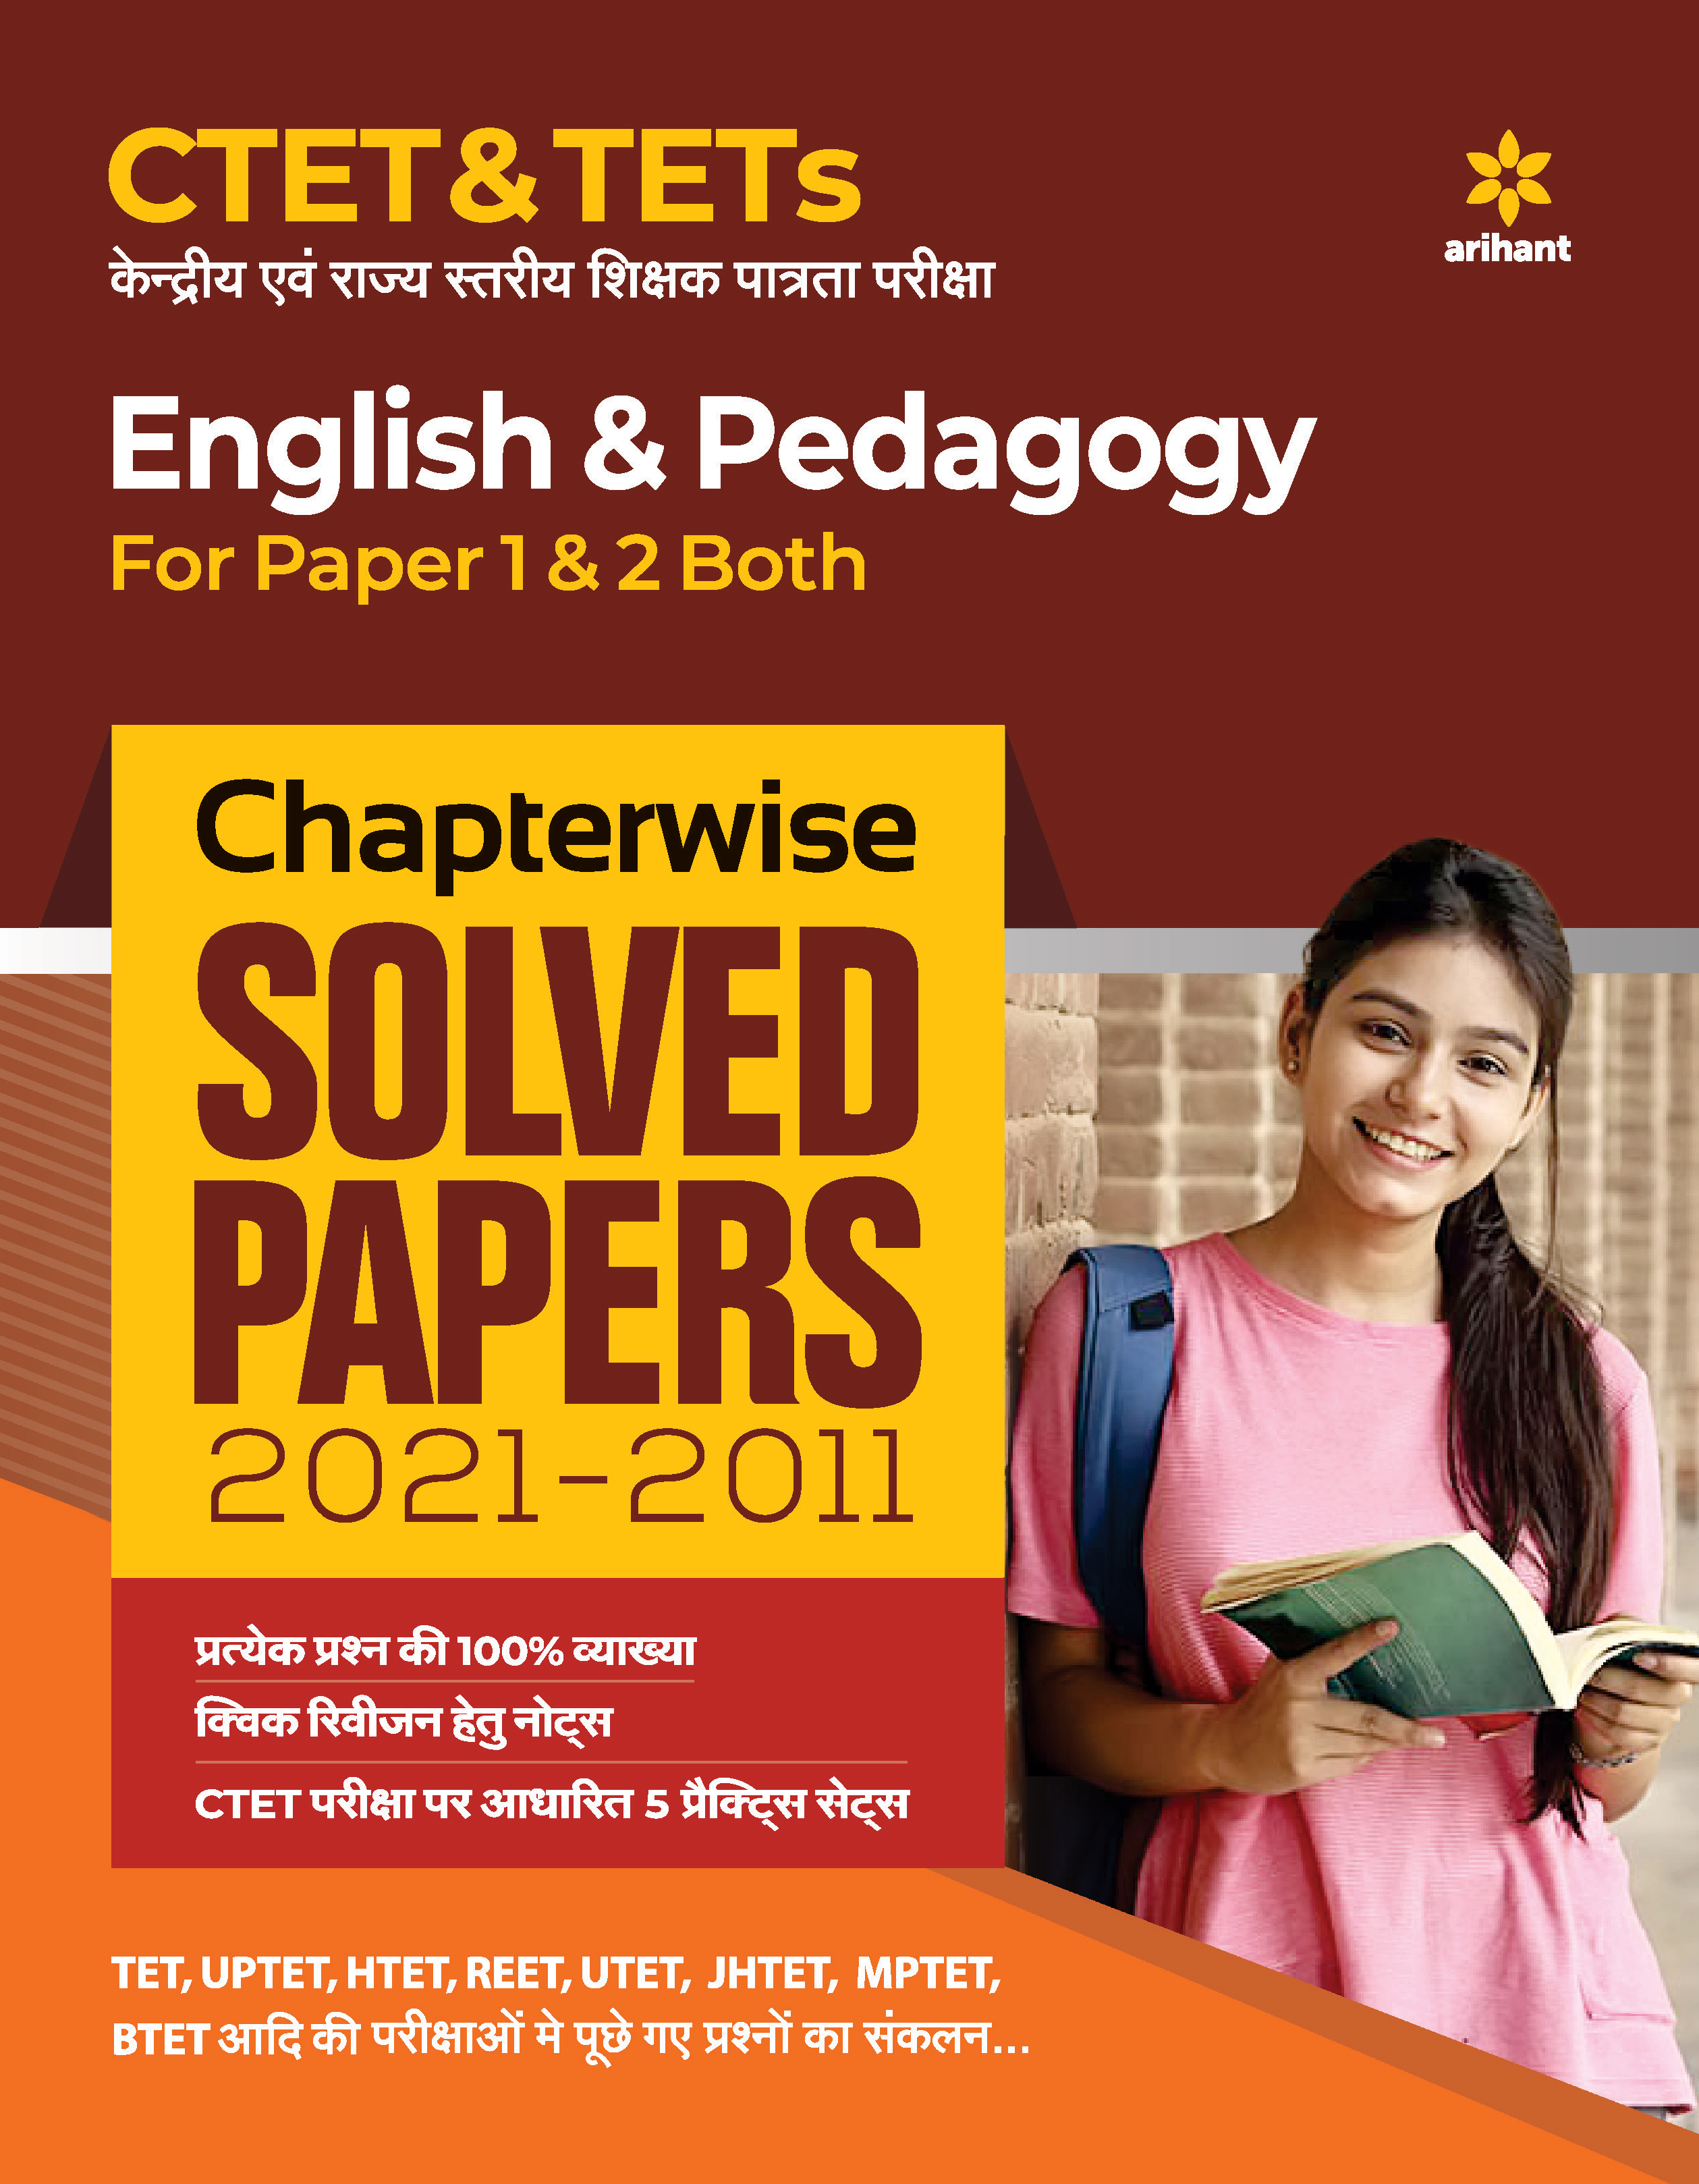 CTET & TETs Chapterwise Solved Papers 2021-2011 English & Pedagogy For Paper 1 & 2 Both 2021